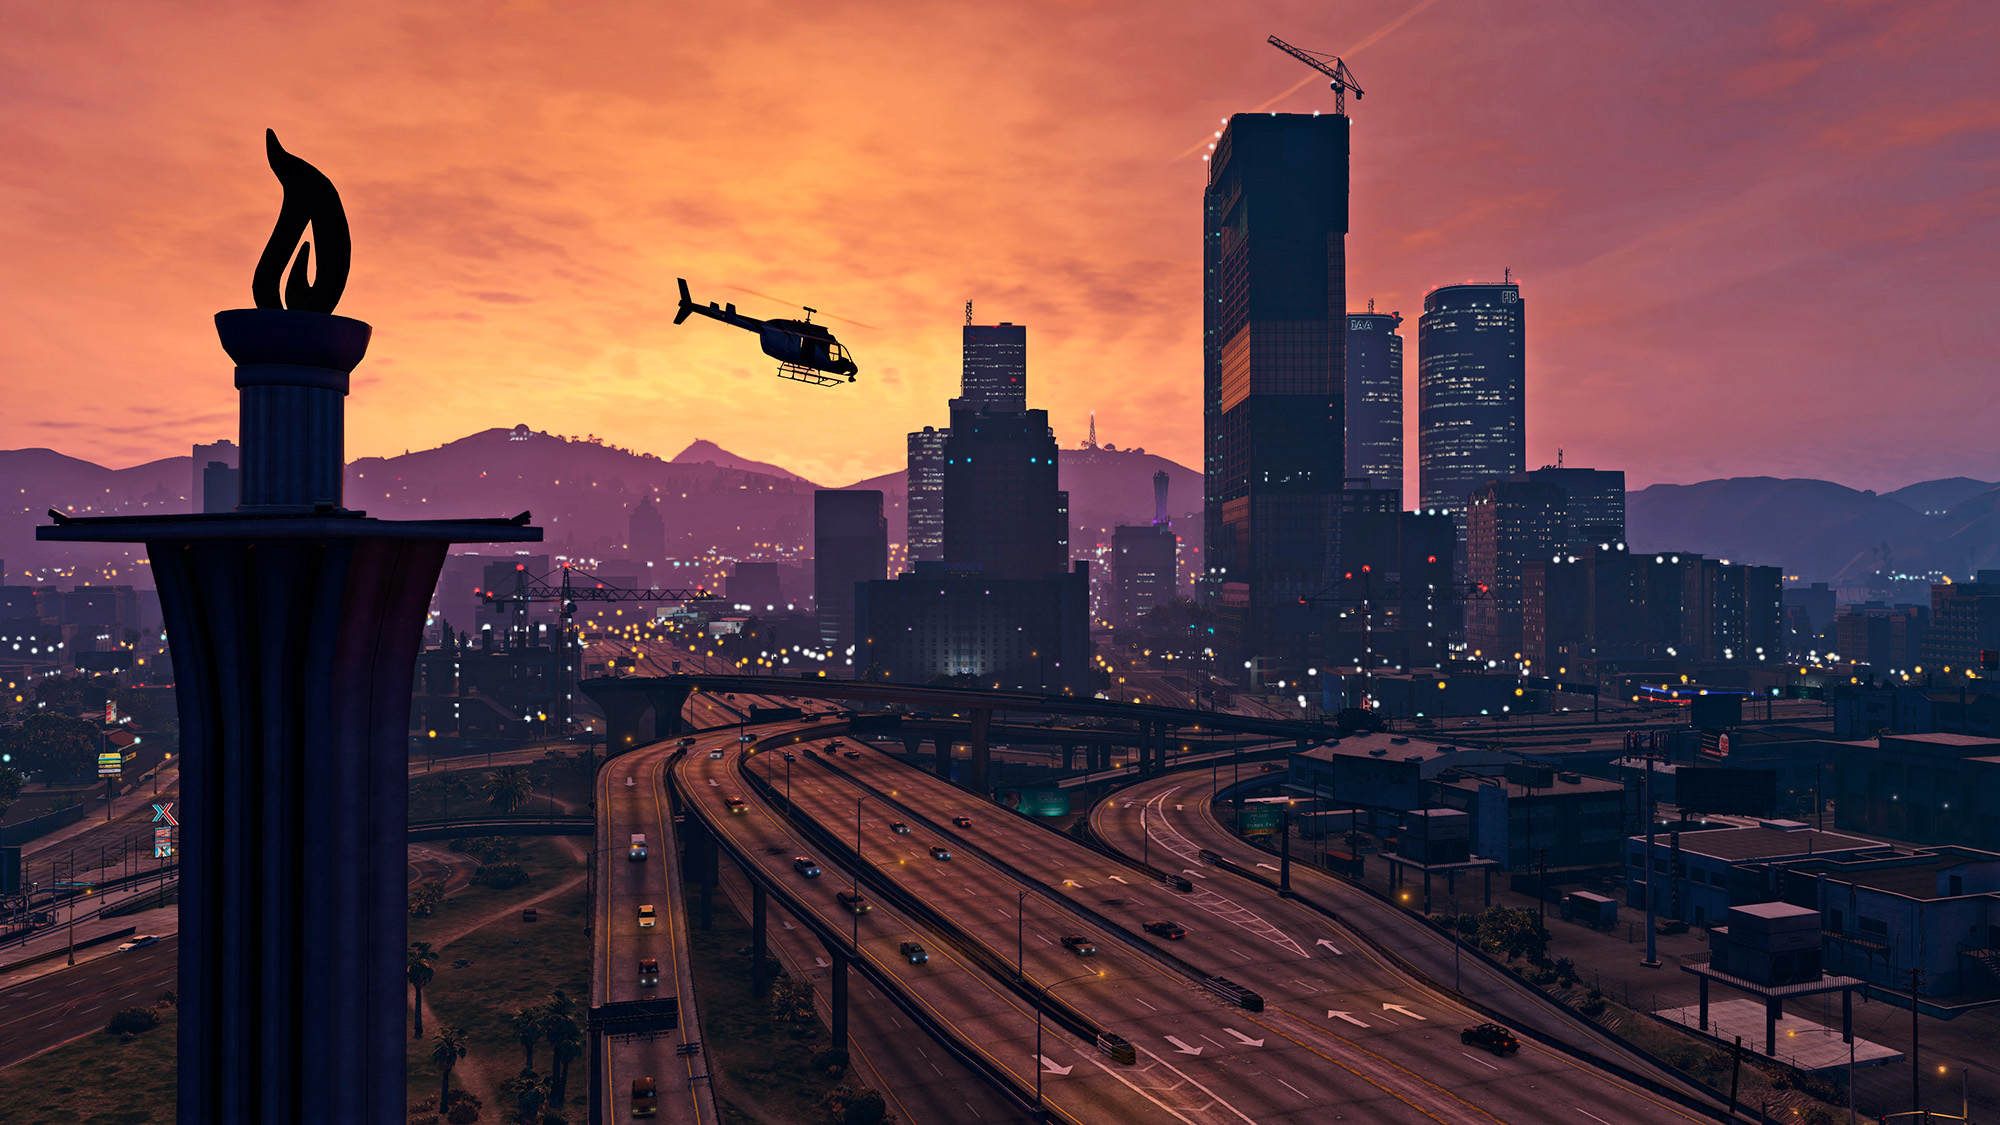 GTA VI trailer to debut in December. Here's what to know.